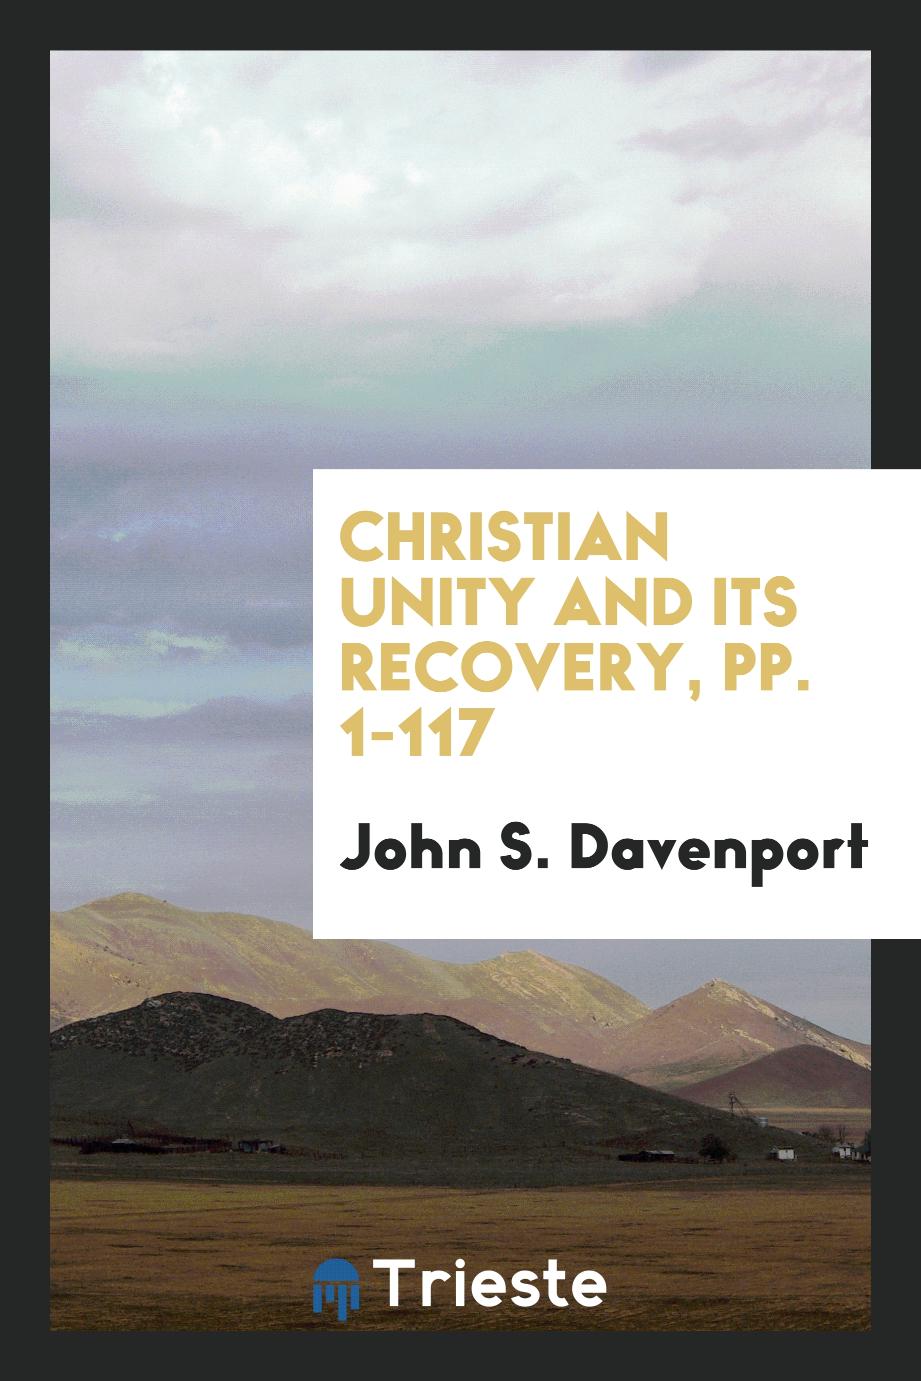 Christian Unity and Its Recovery, pp. 1-117